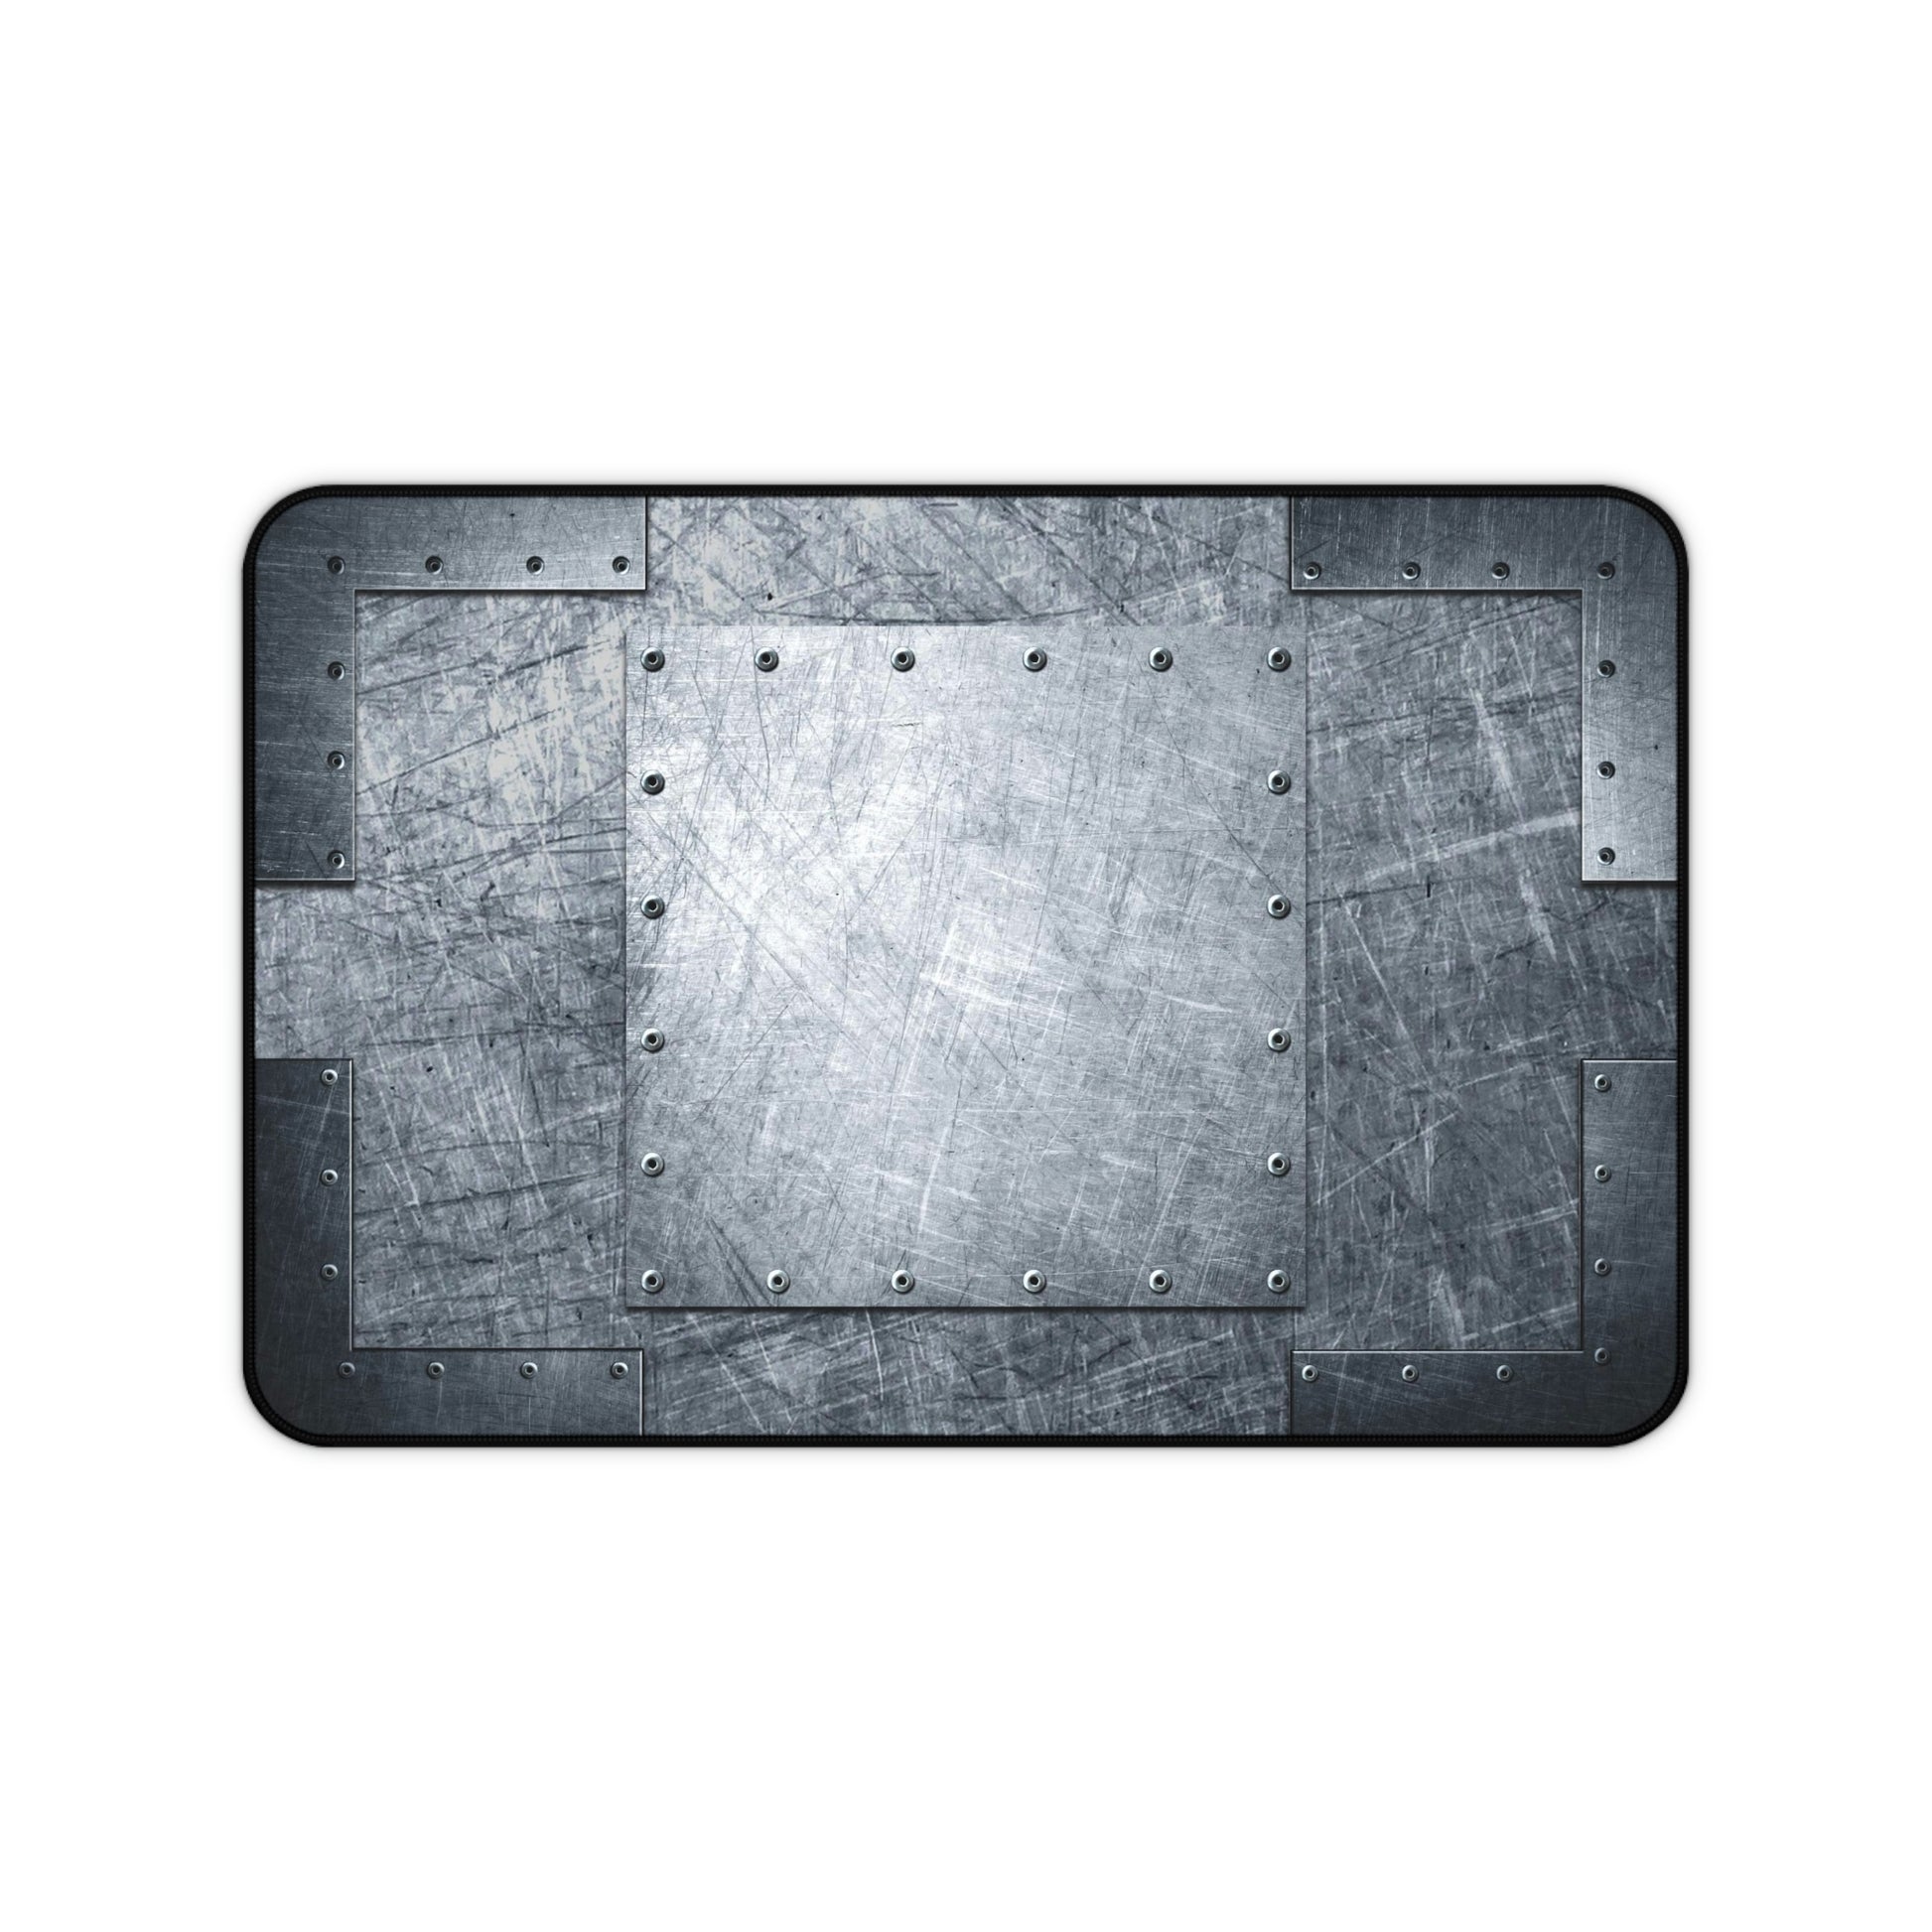 Industrial Themed Desk Accessories - Riveted Steel Sheets Print on Neoprene Desk Mat 12 by 18